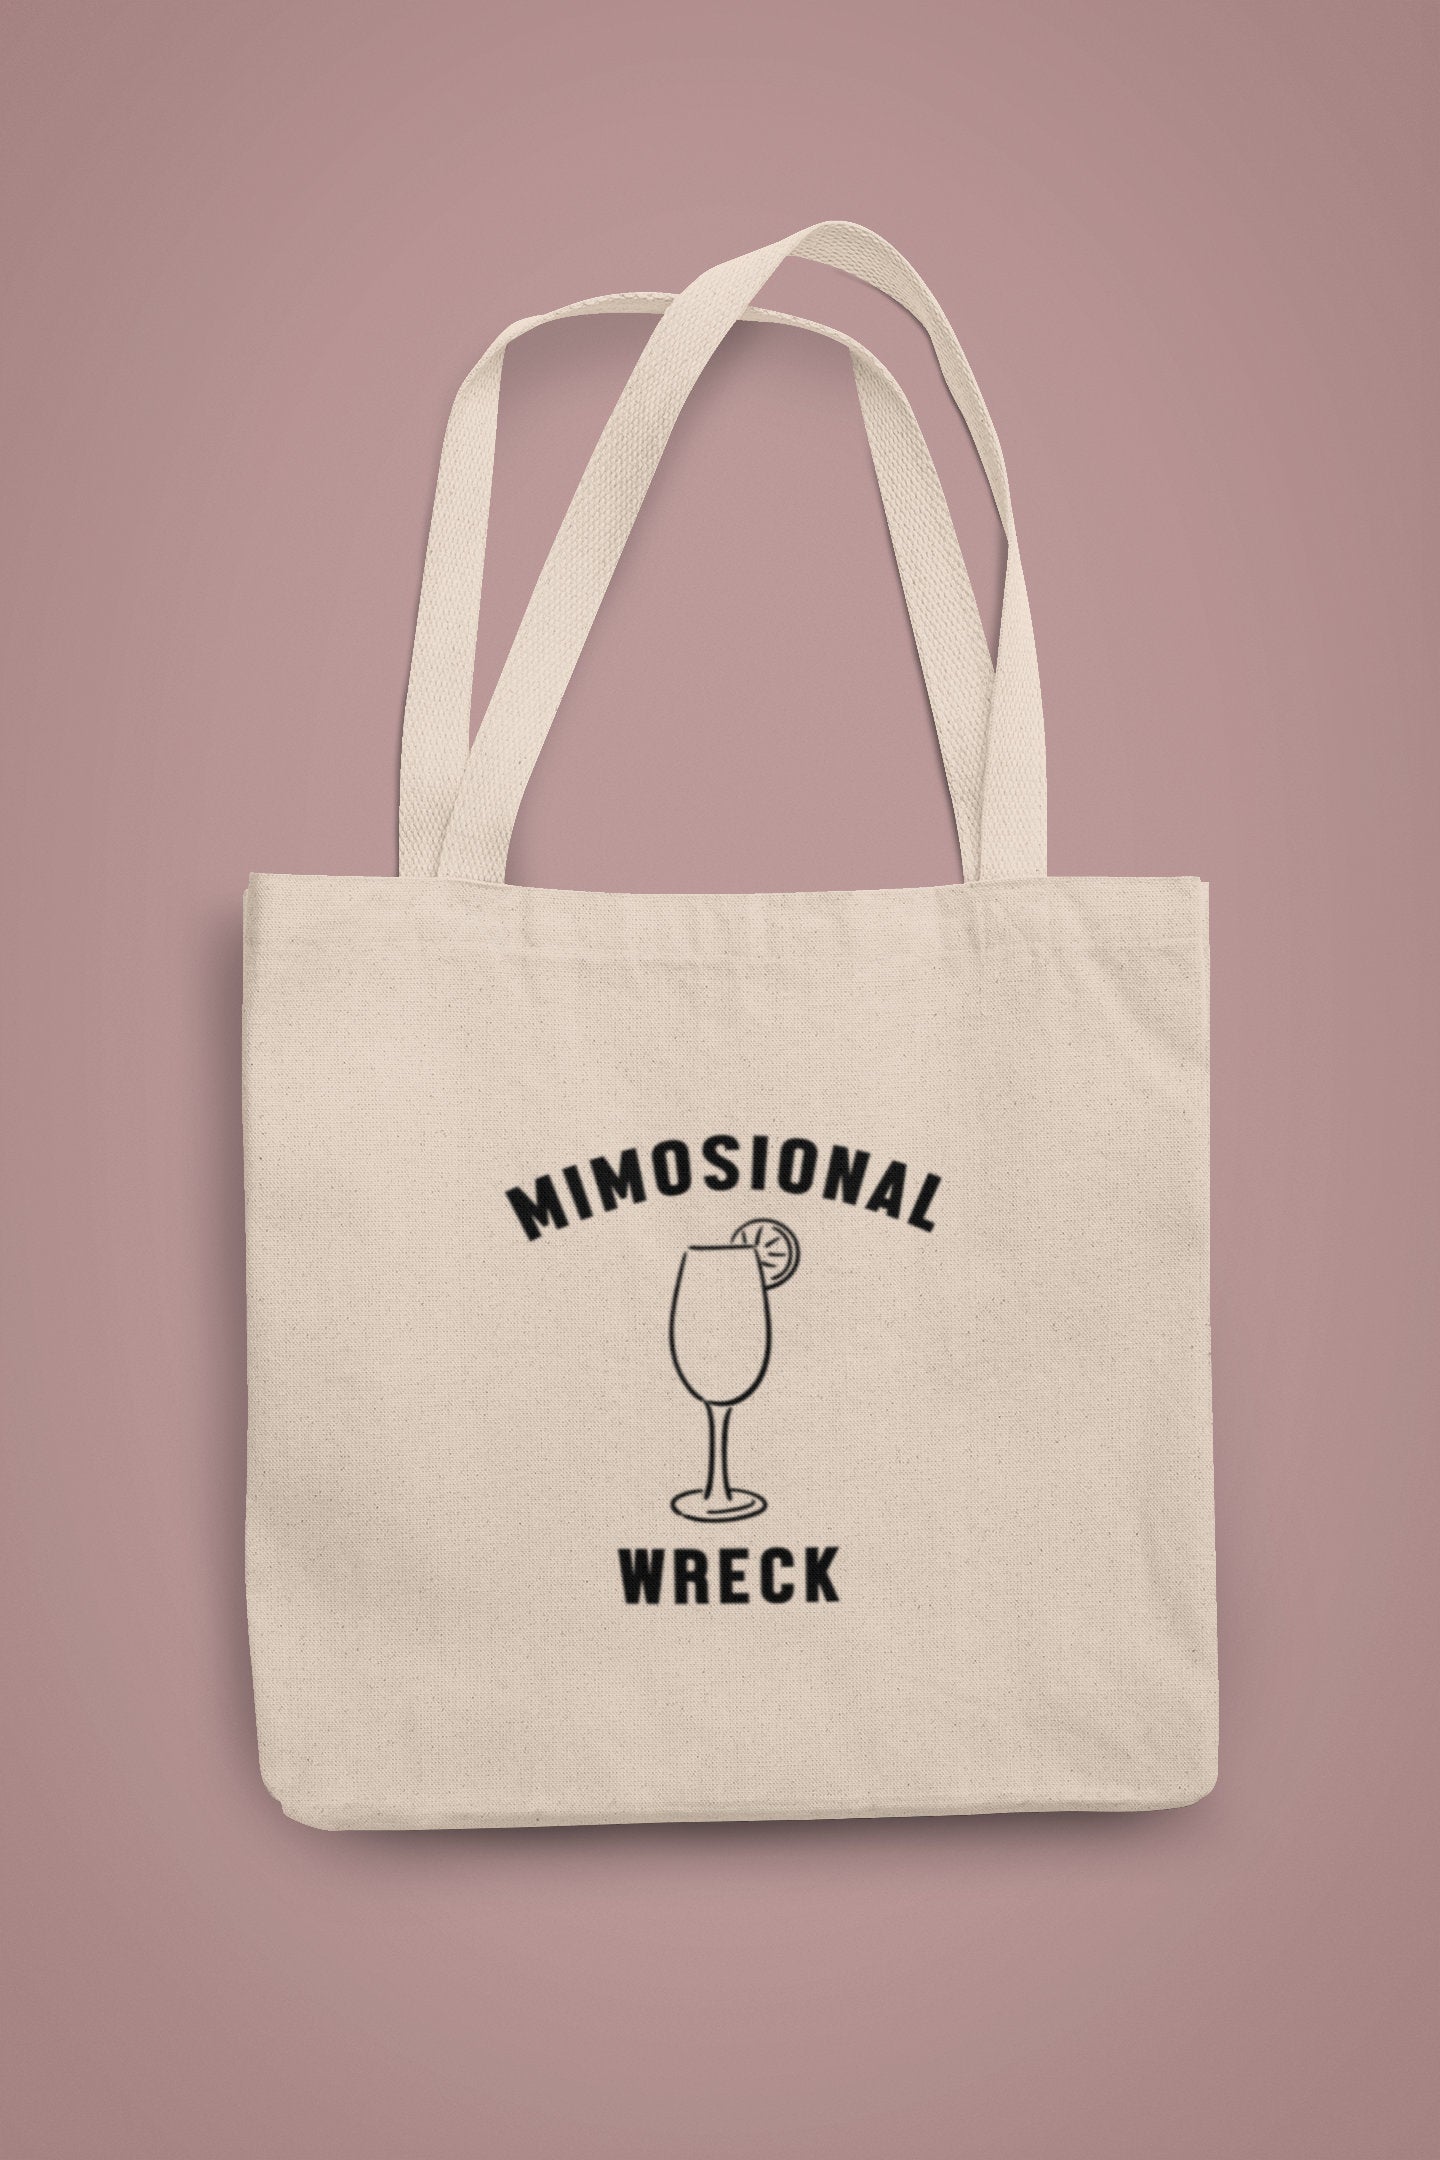 Mimosional Wreck Tote